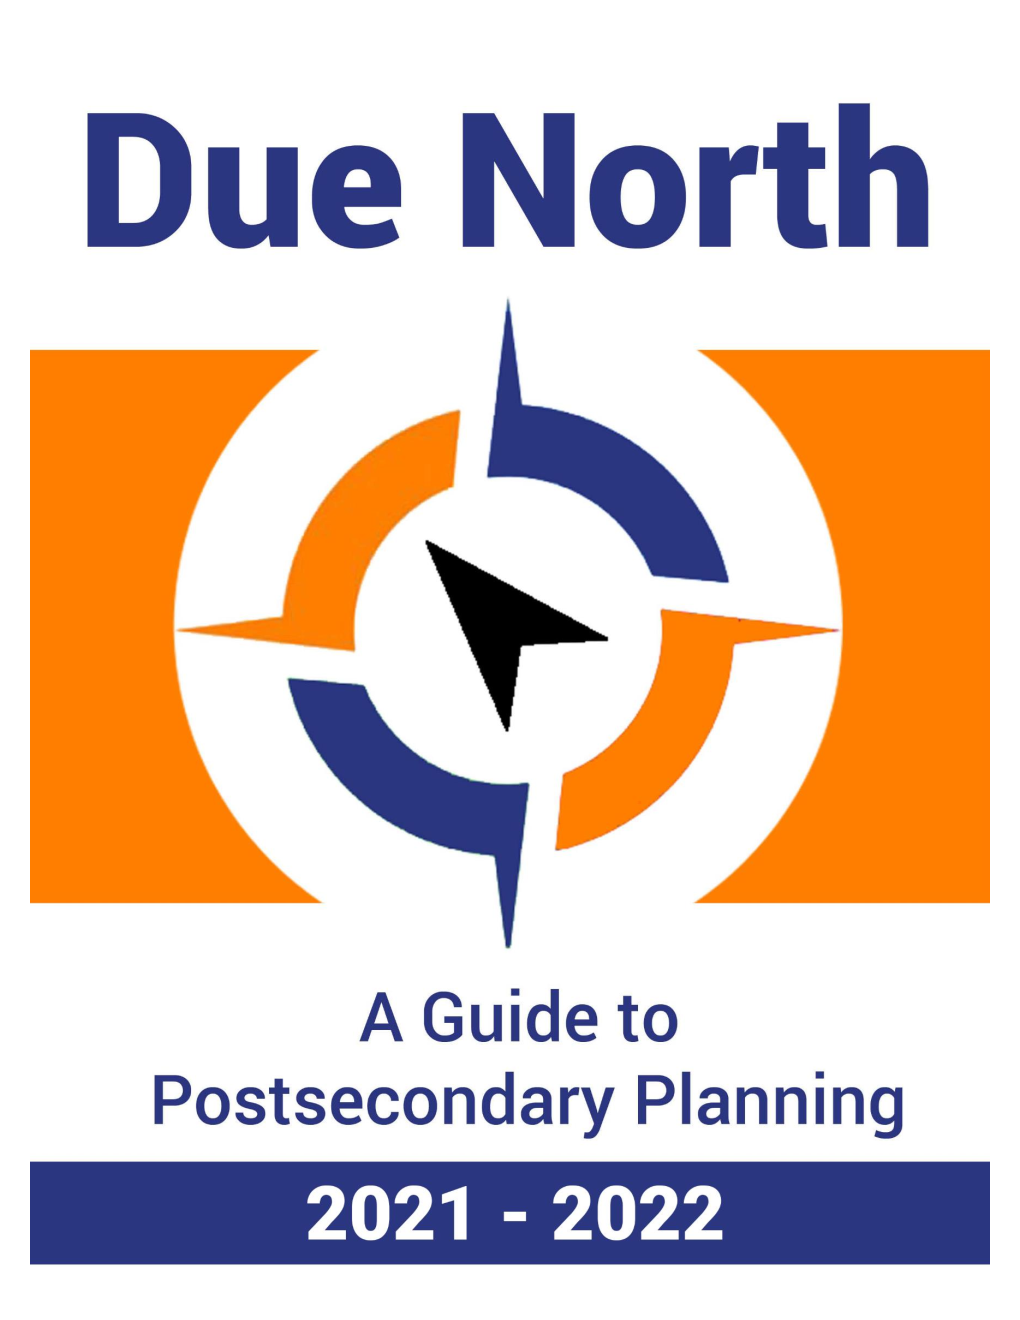 Due North: Postsecondary Planning Guide